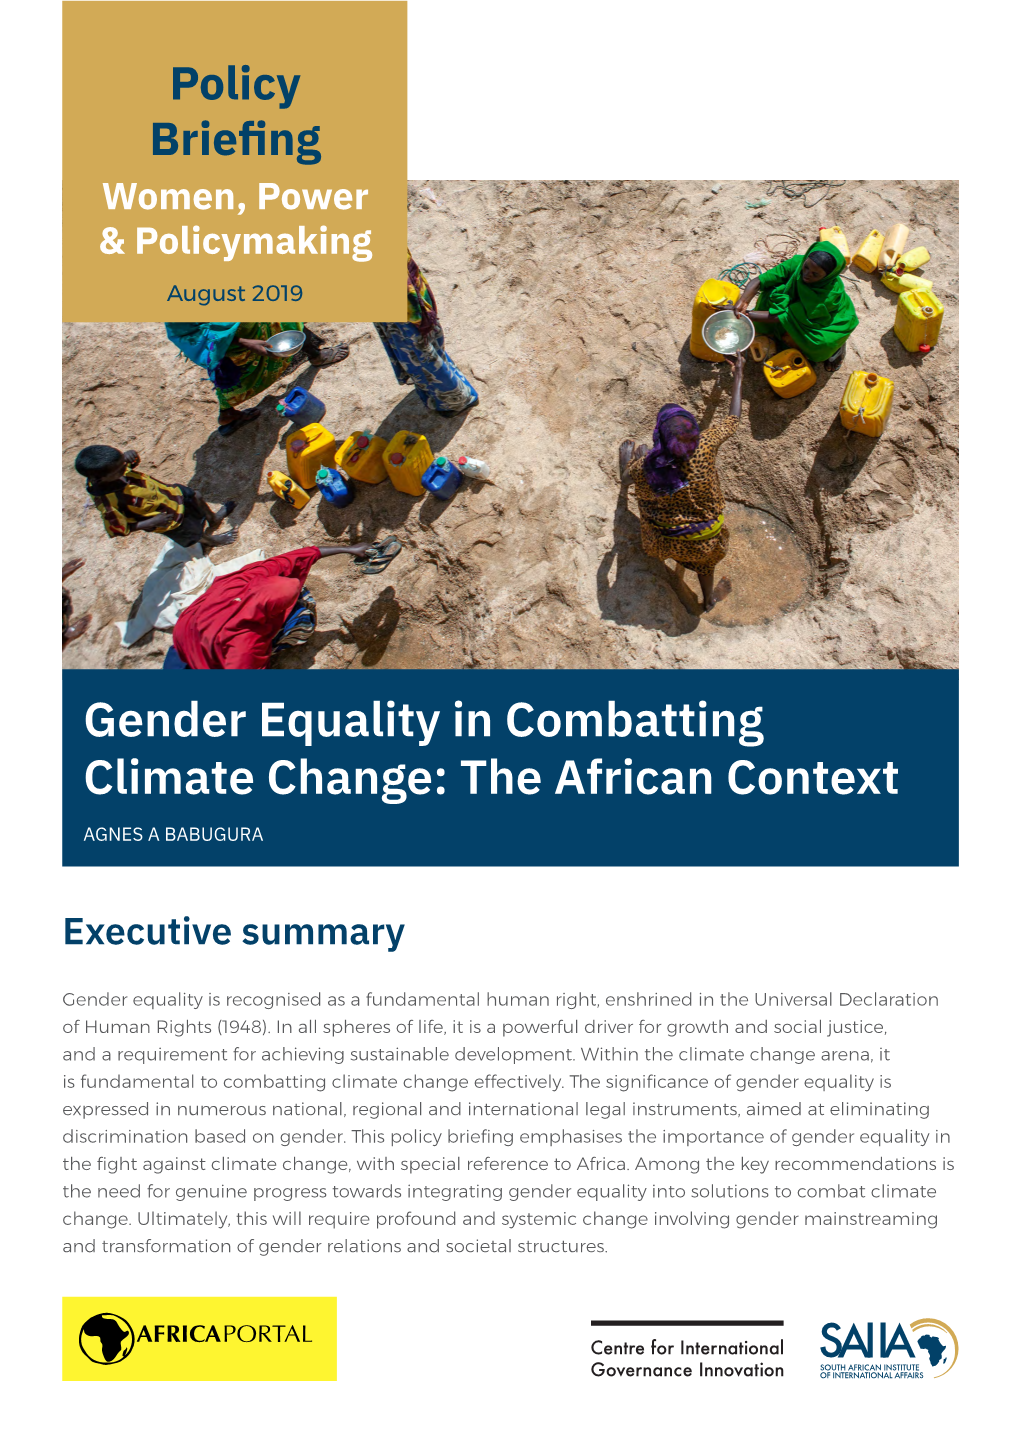 Gender Equality in Combatting Climate Change: the African Context